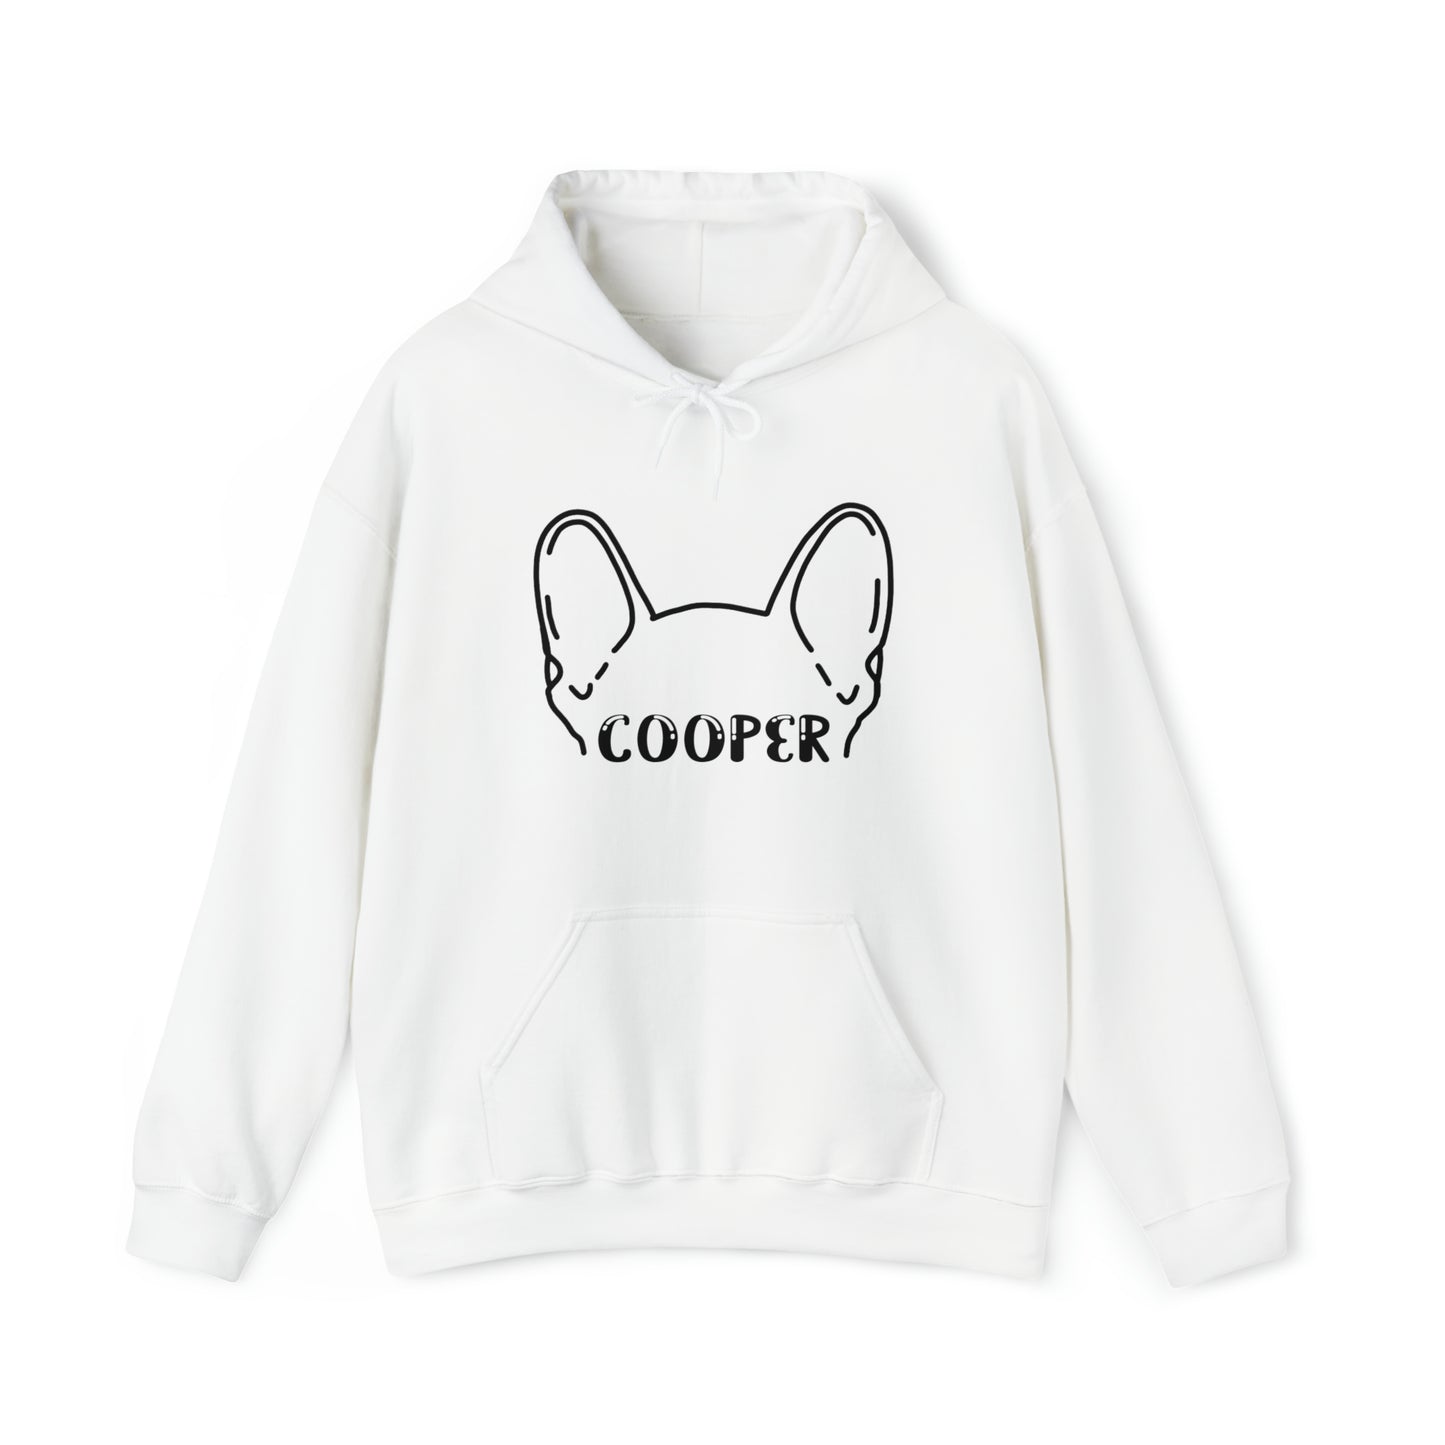 My Frenchie - Personalized Unisex Hoodie